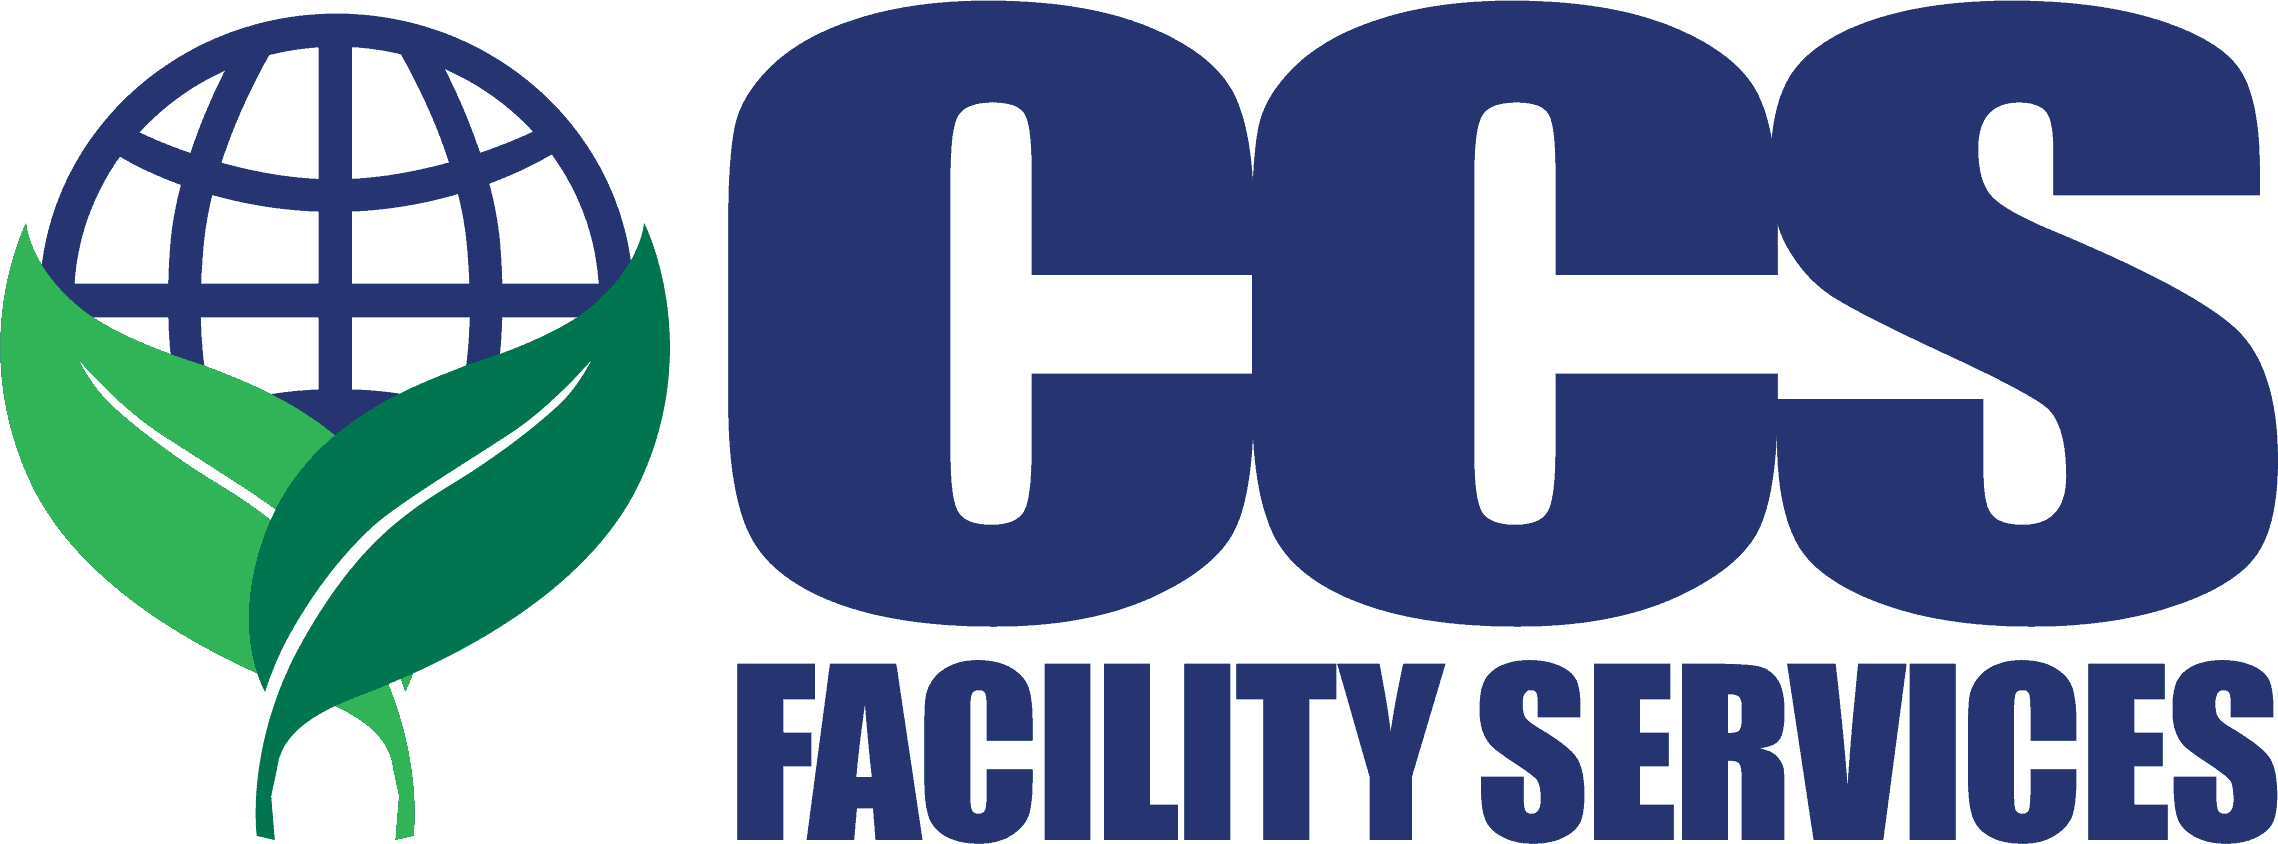 CCS Facility Services Primary